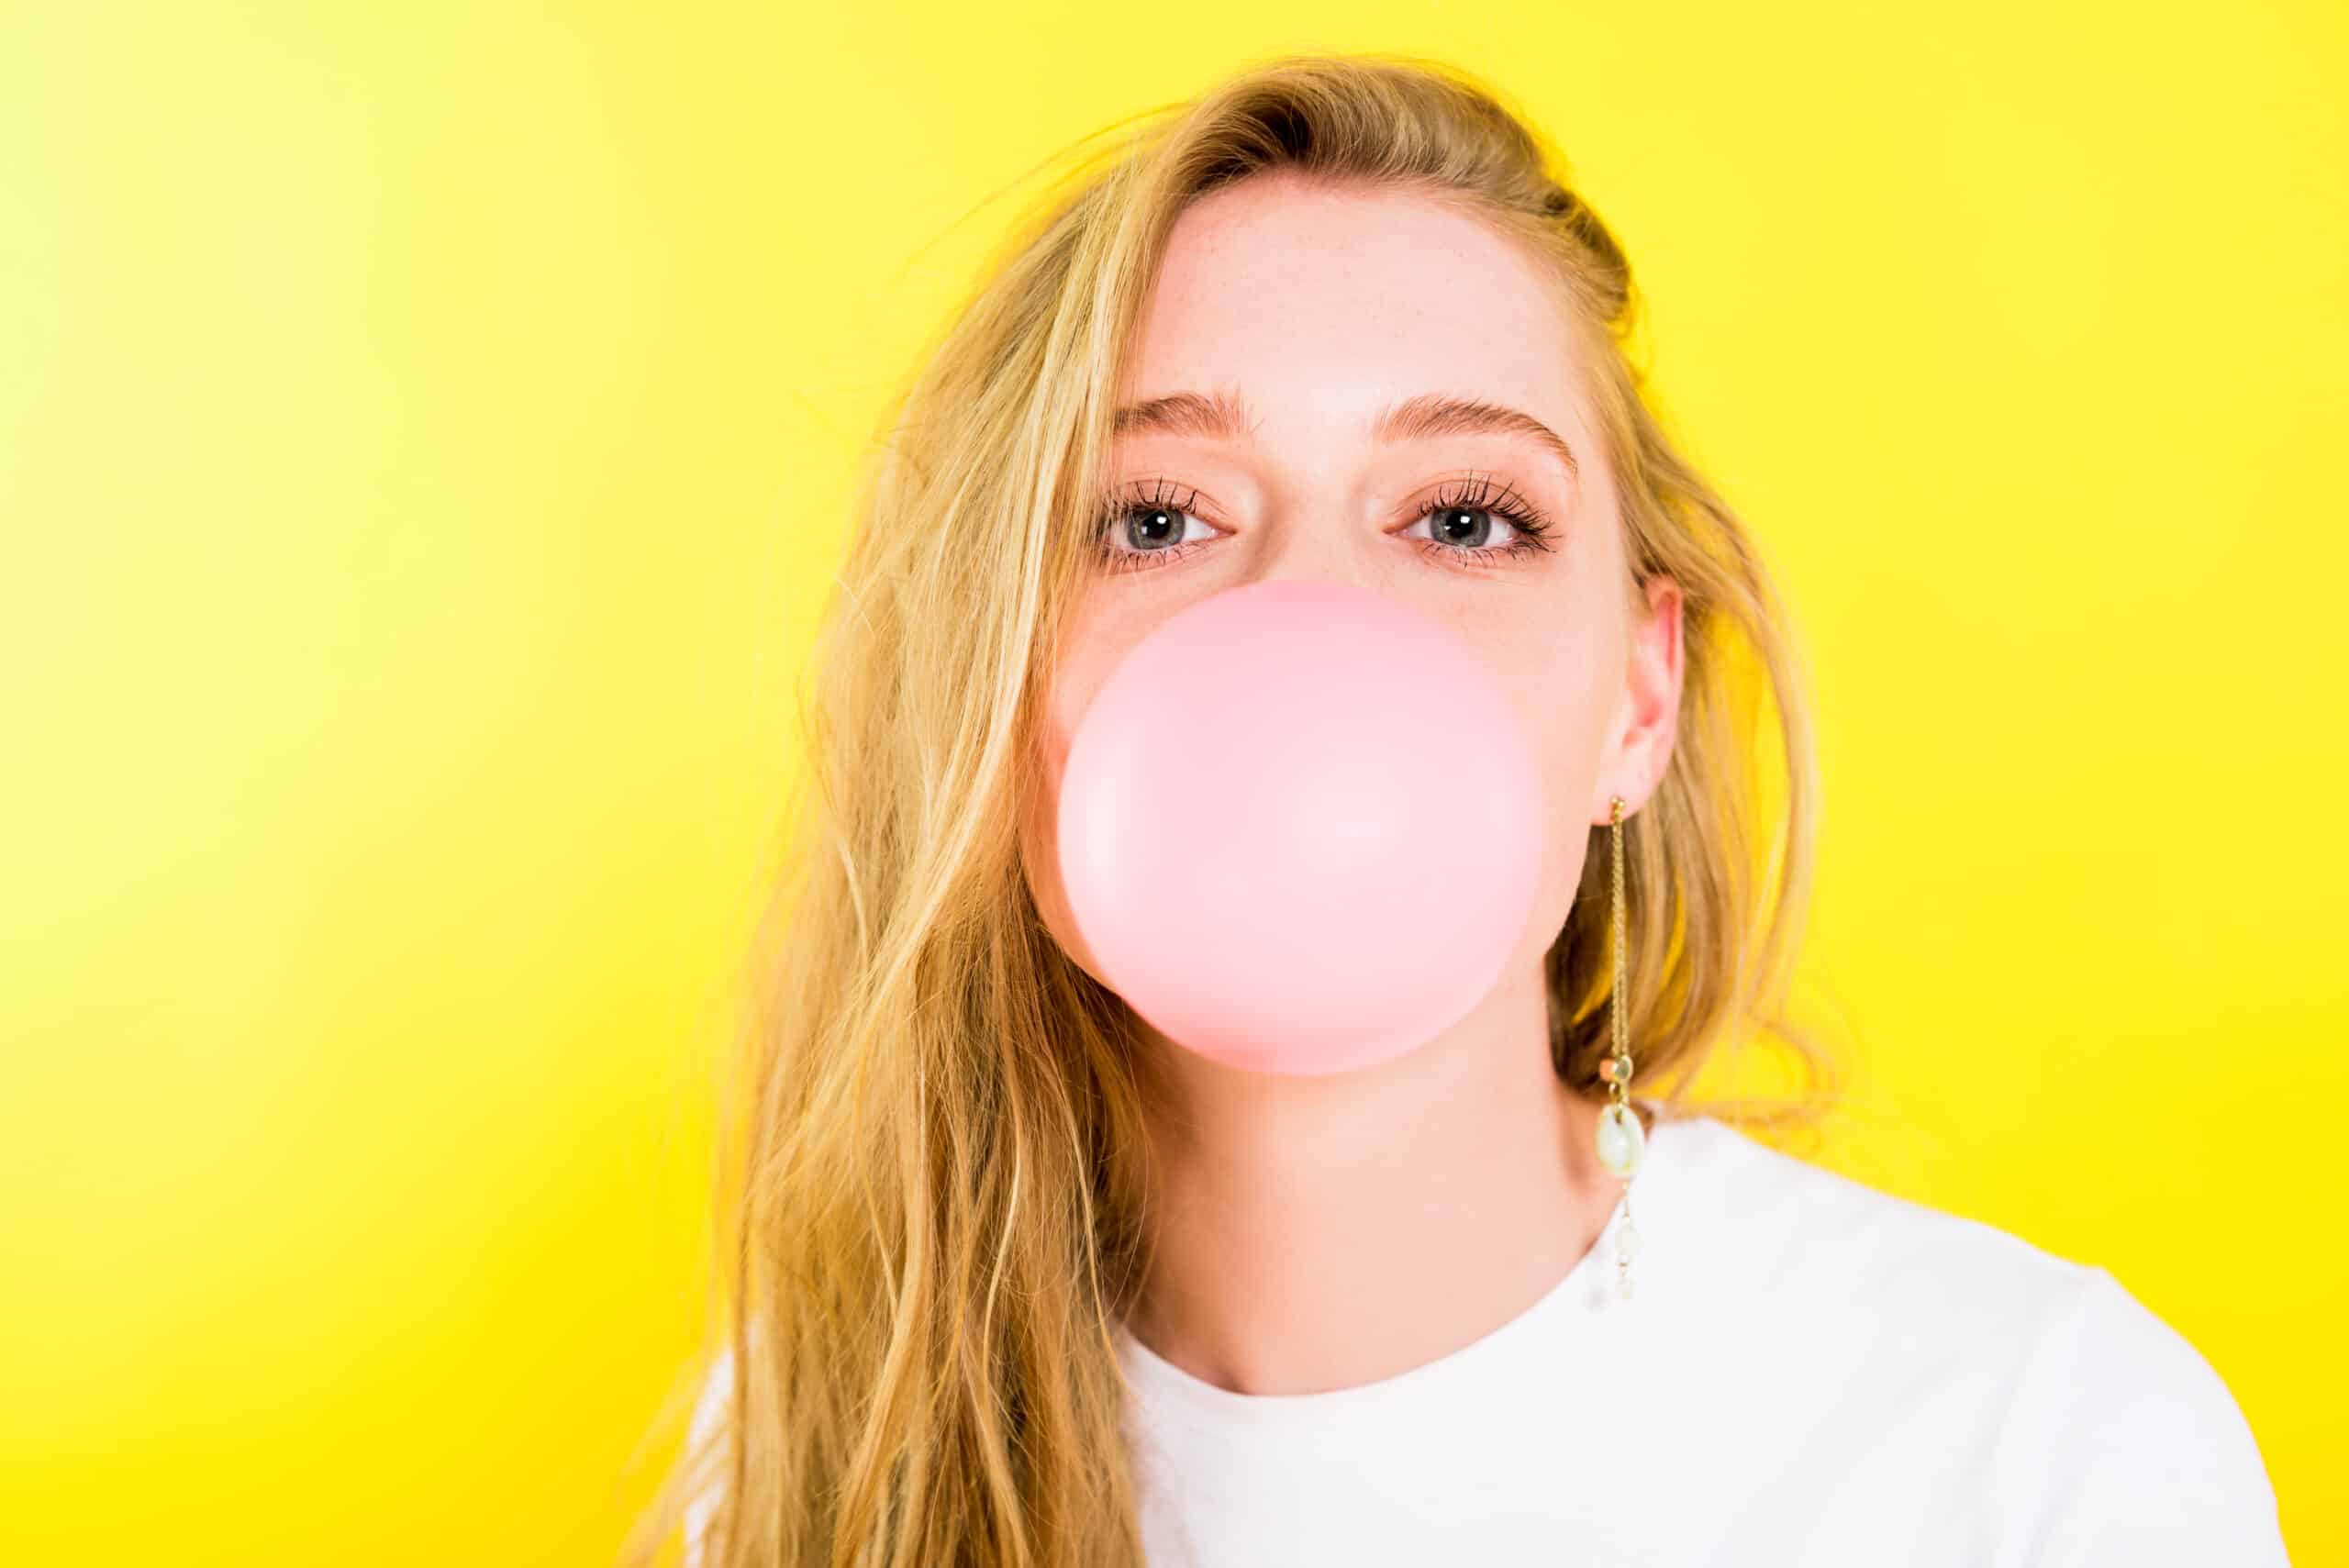 Is Chewing Gum Good For Your Teeth? 4 Things You Need To Know